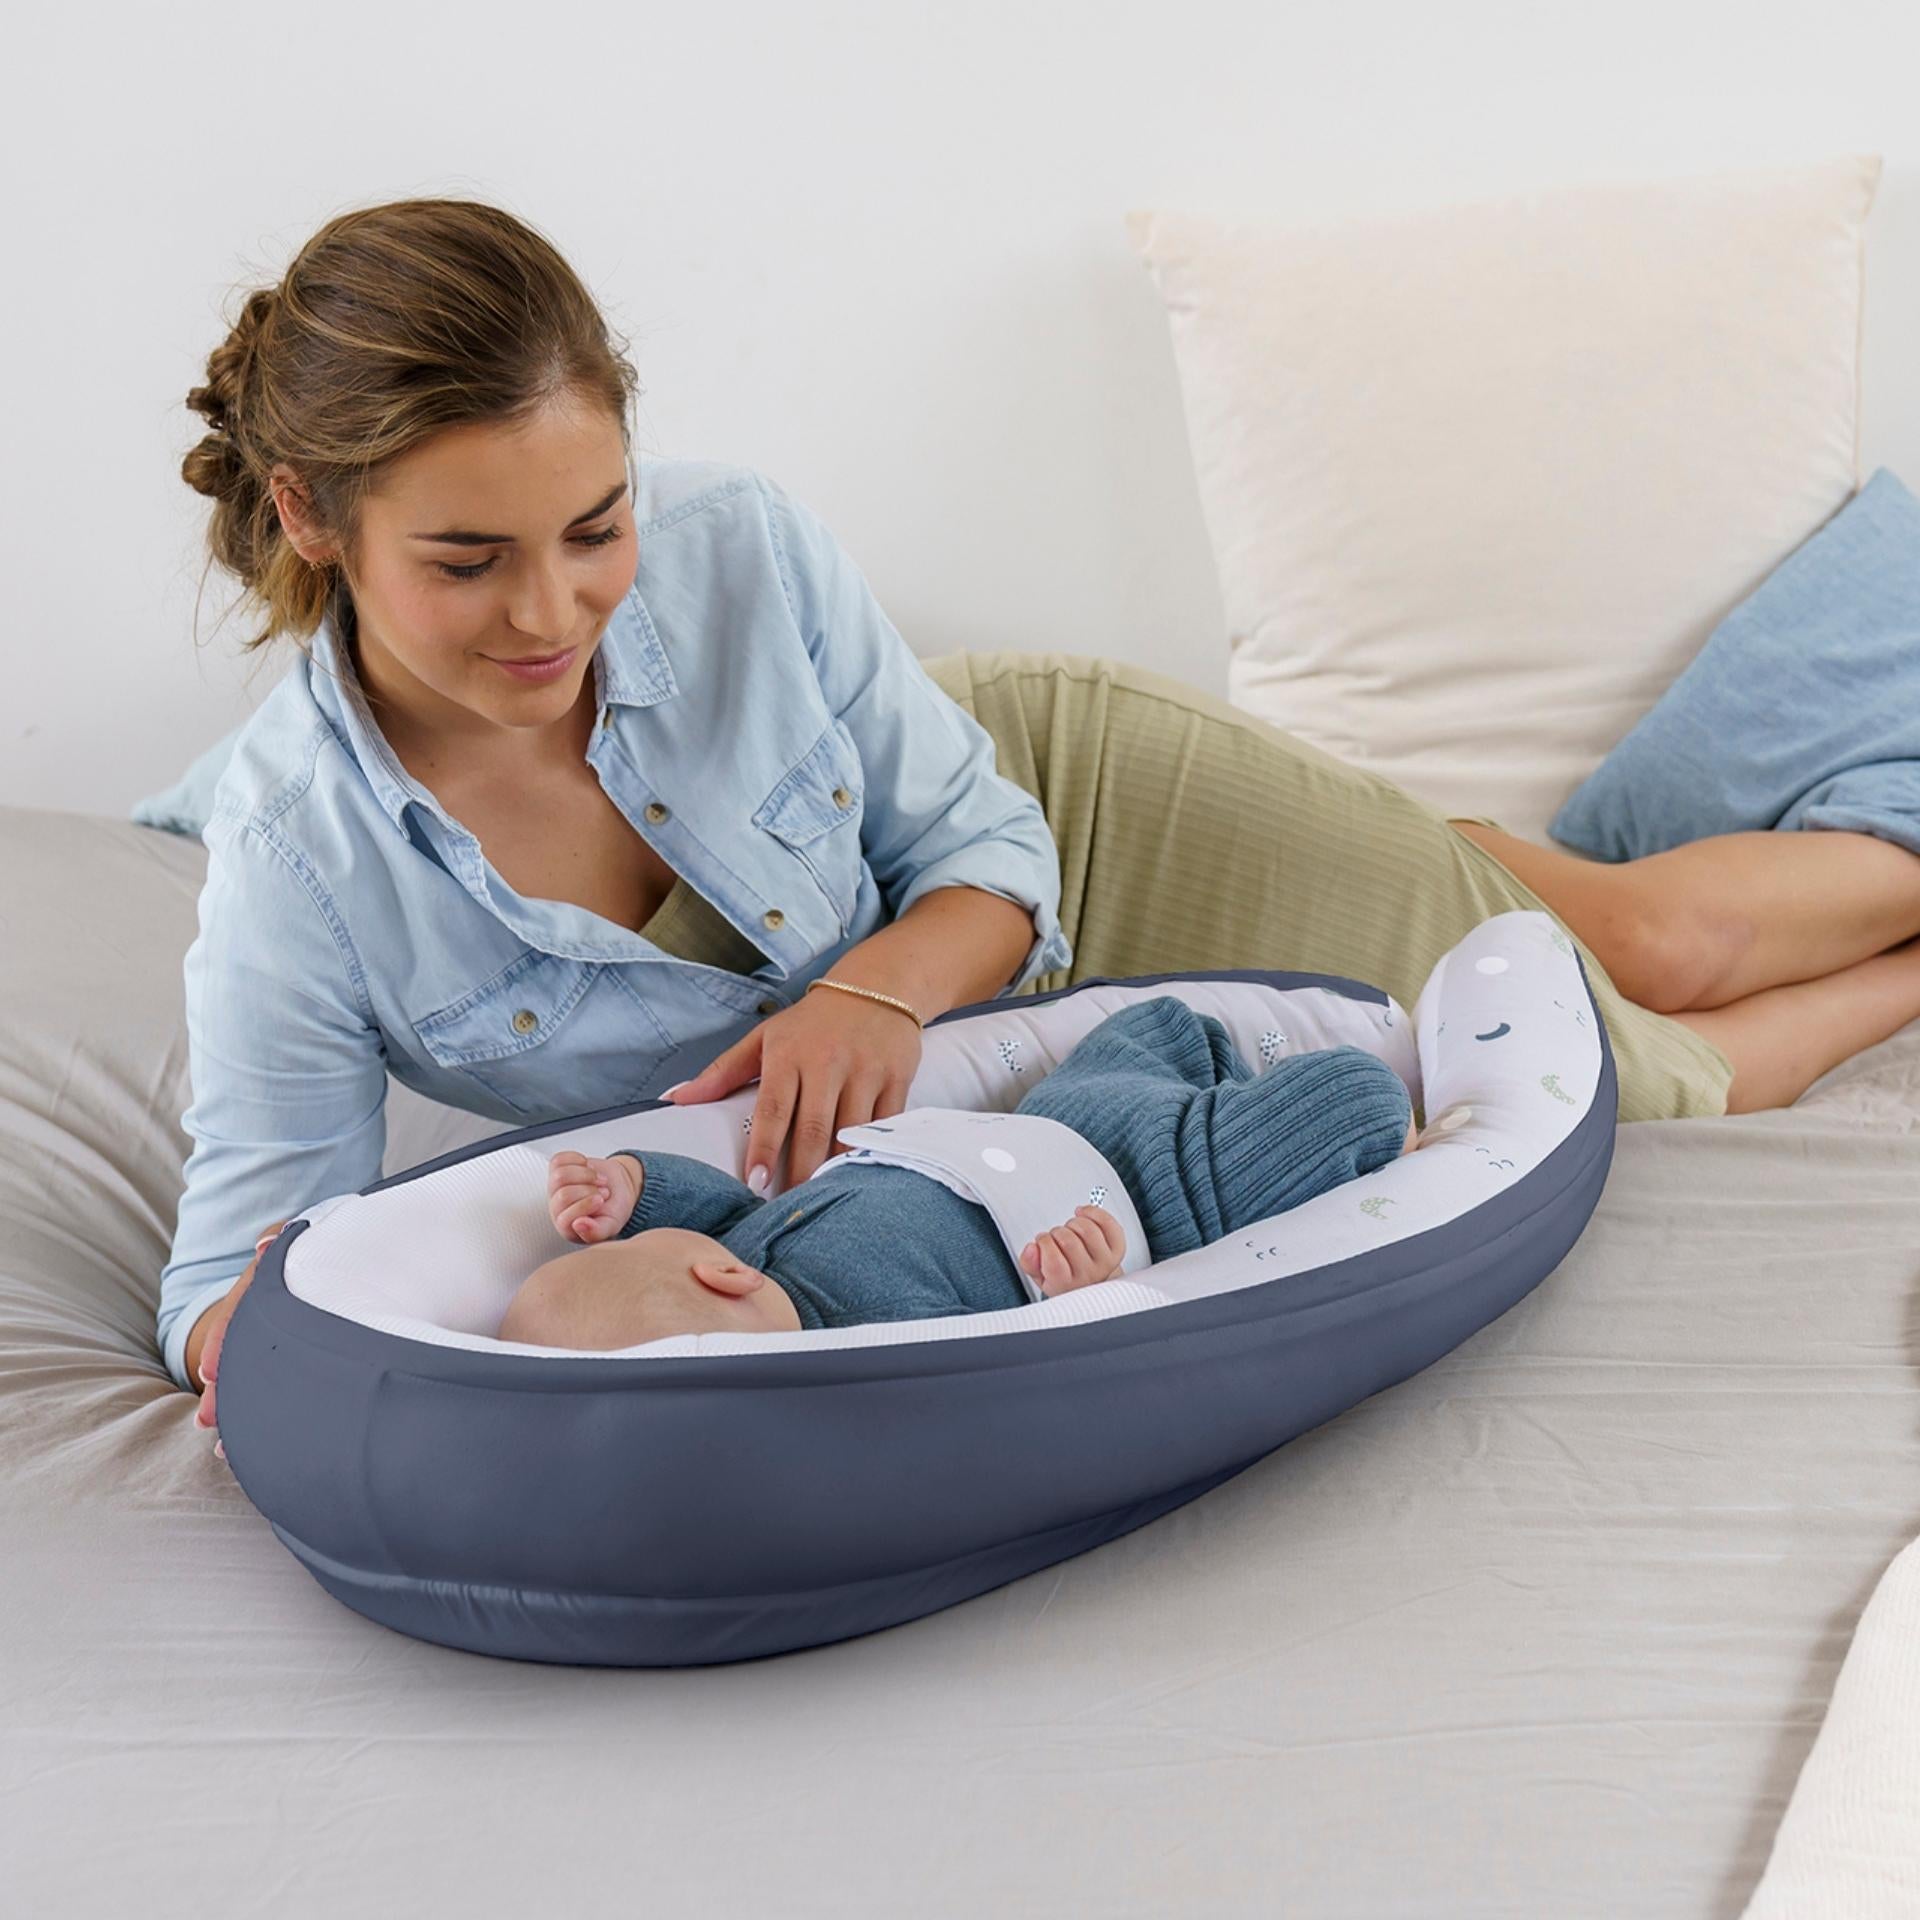 doomoo cocoon - safe and cocoon babynest - reassure the baby